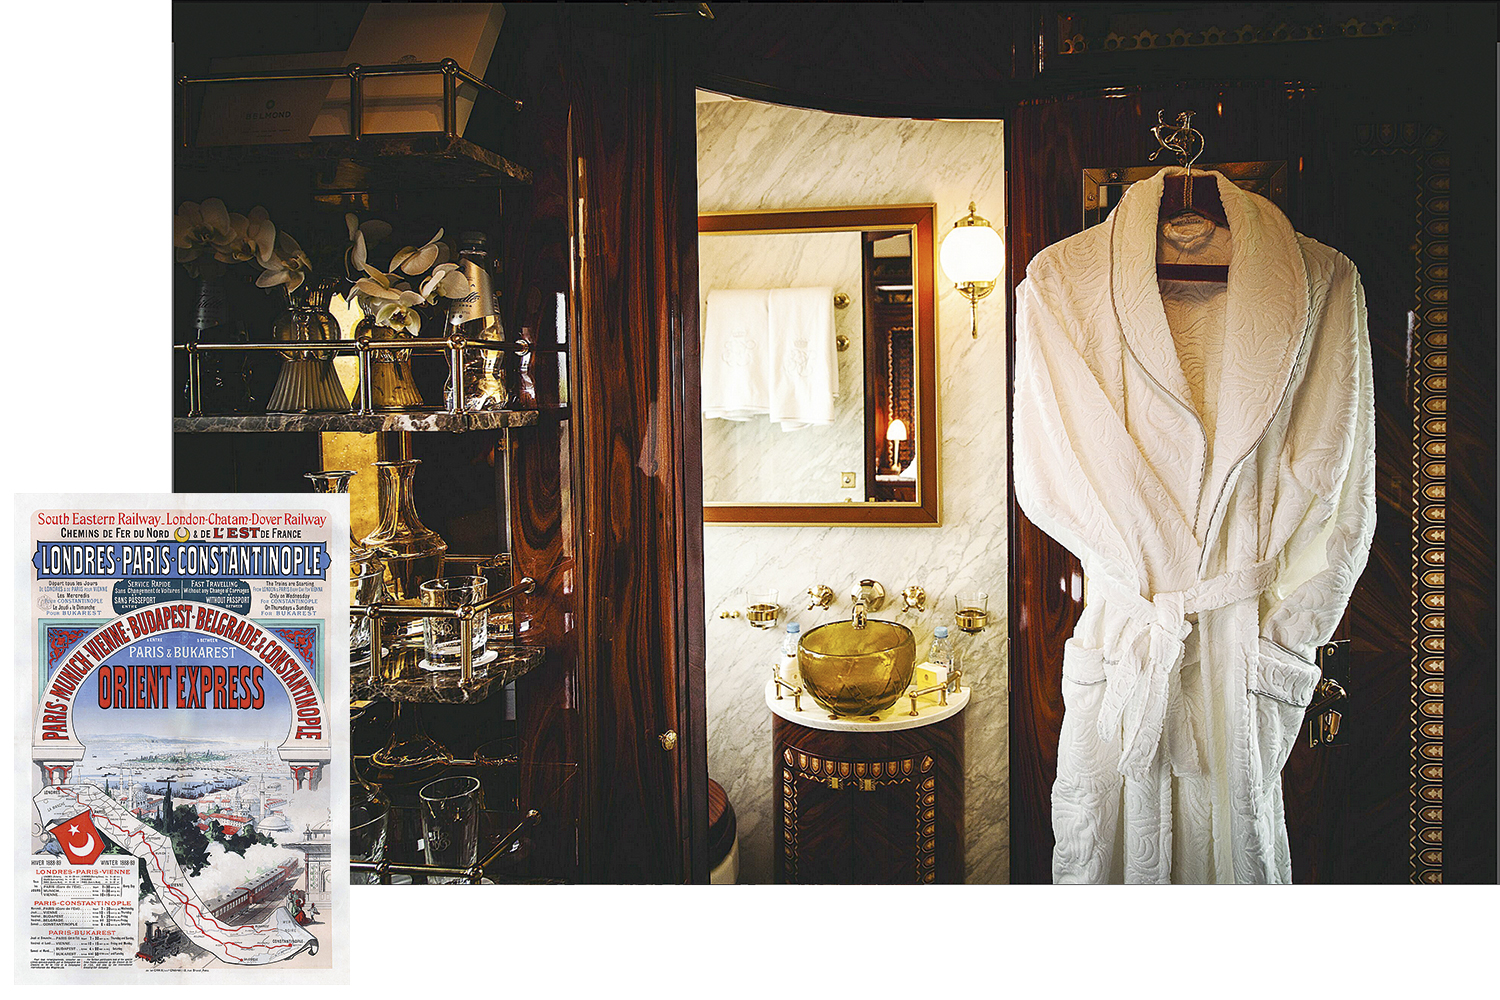 GLAMOR REVISITED - The luxurious cabin of the mythical Orient Express today and a ticket from the past: the 